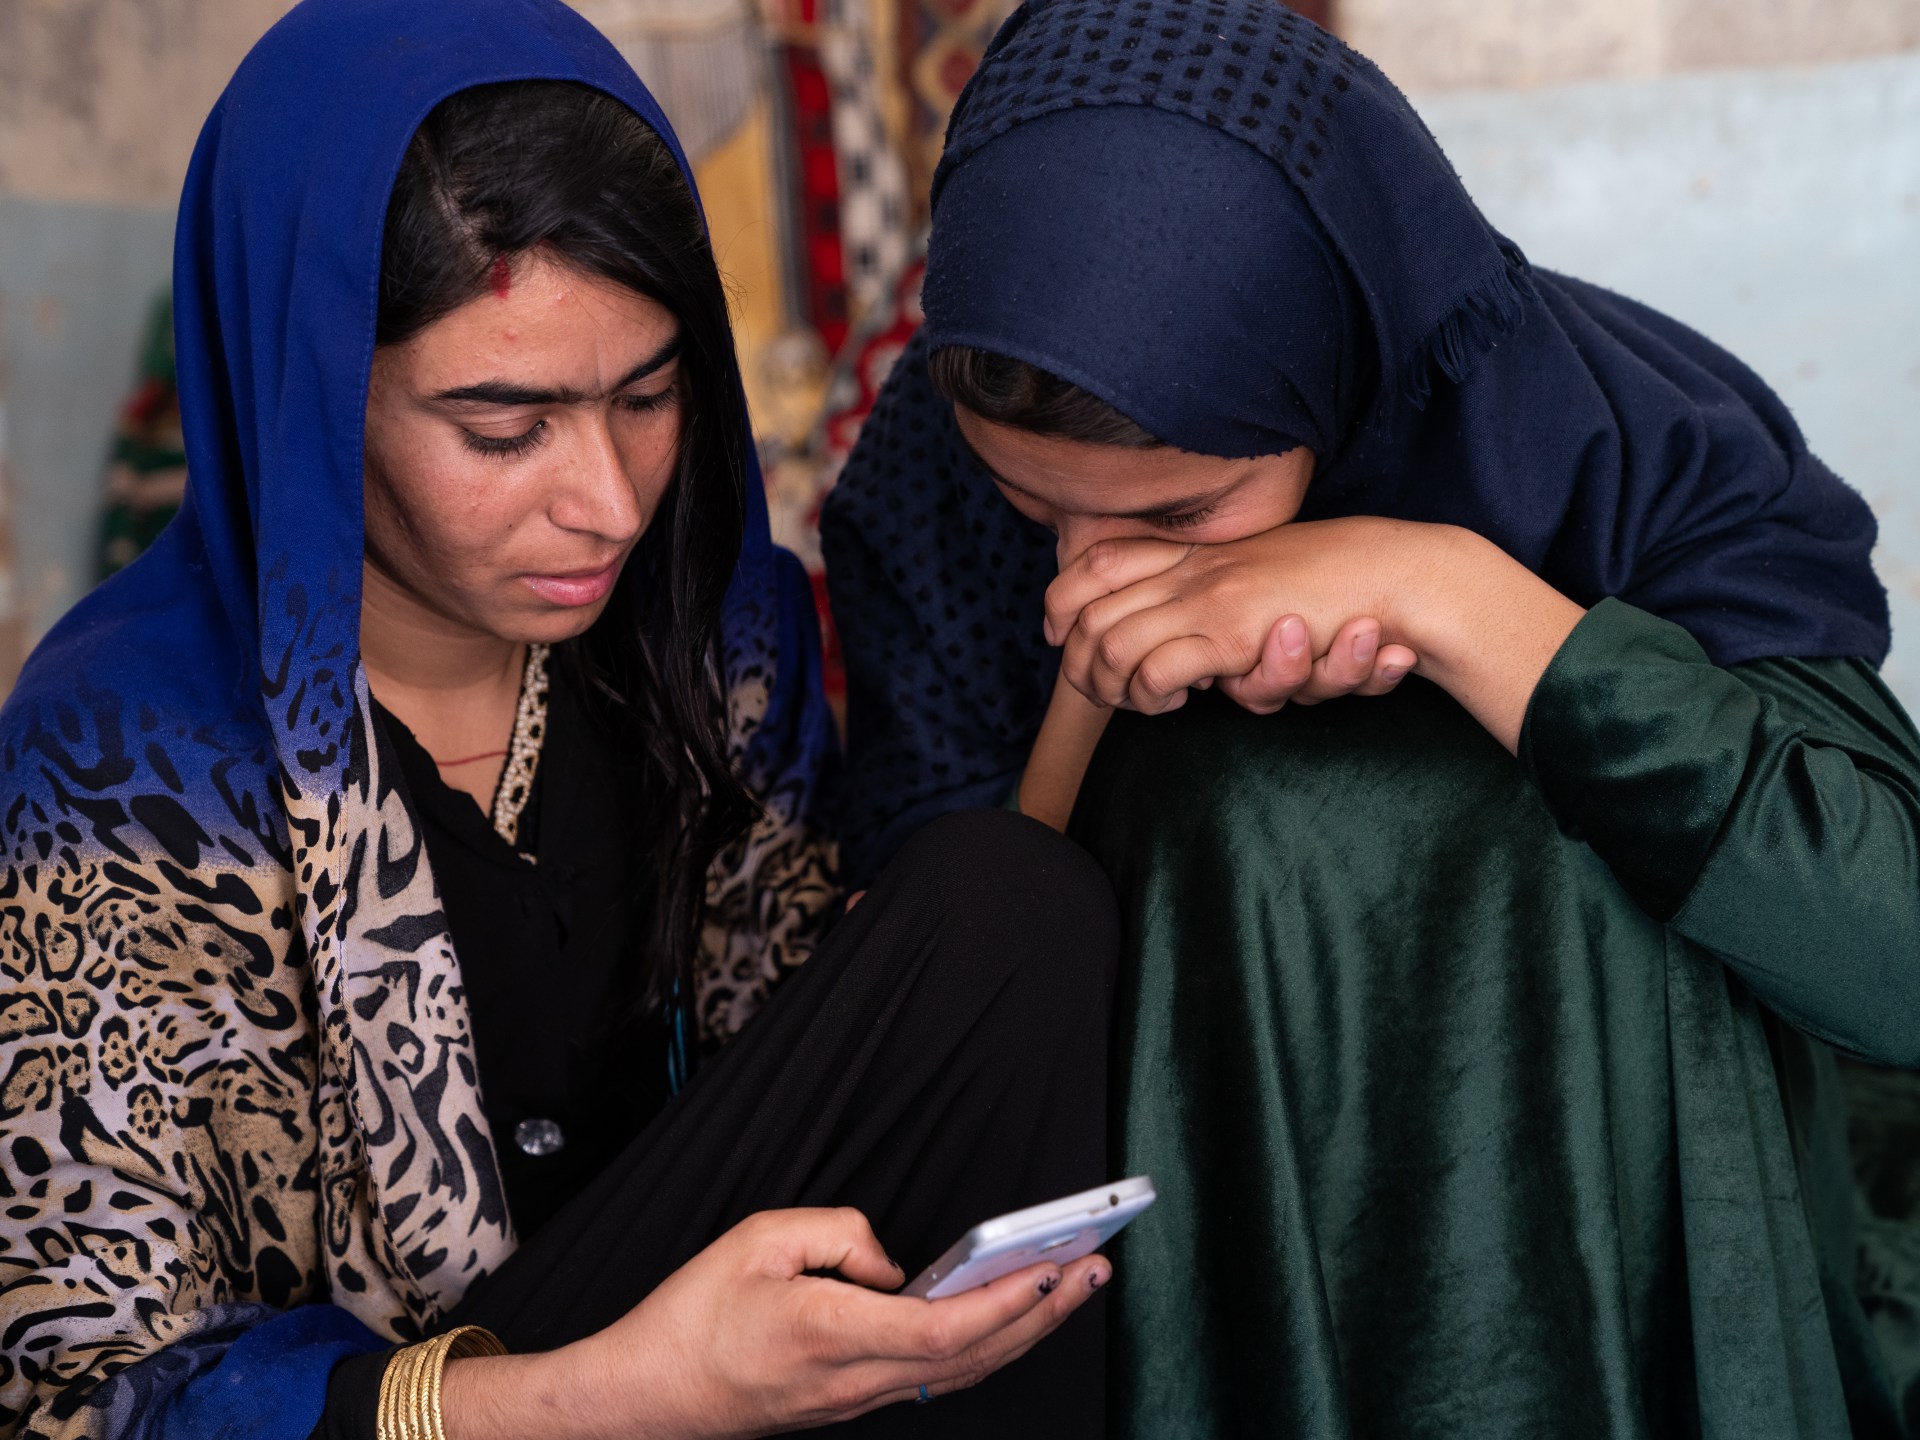 ‘I’ll be sacrificed’: The lost and sold daughters of Afghanistan